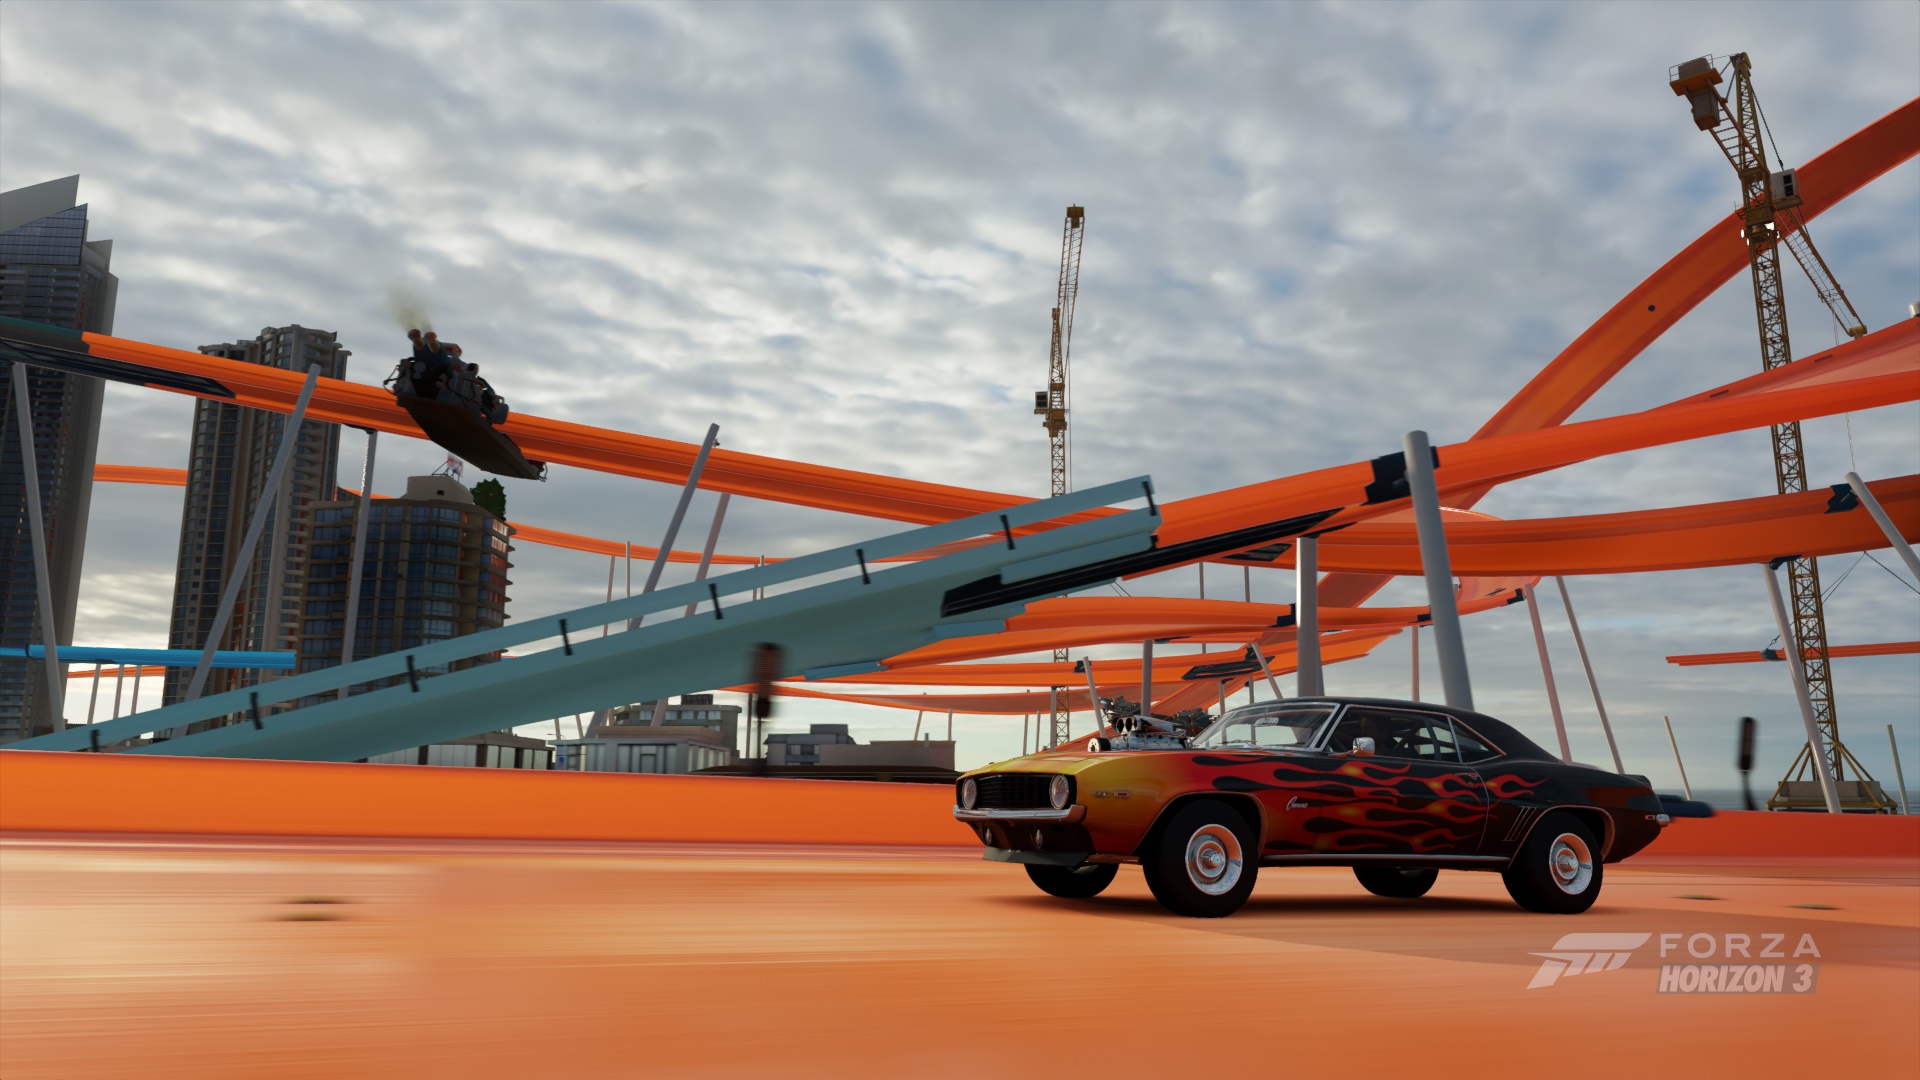 General 1920x1080 Forza Horizon 3 video games Chevrolet muscle cars American cars overcast clouds sky PlaygroundGames car video game art screen shot CGI Chevrolet Camaro race tracks watermarked cranes (machine) building side view digital art